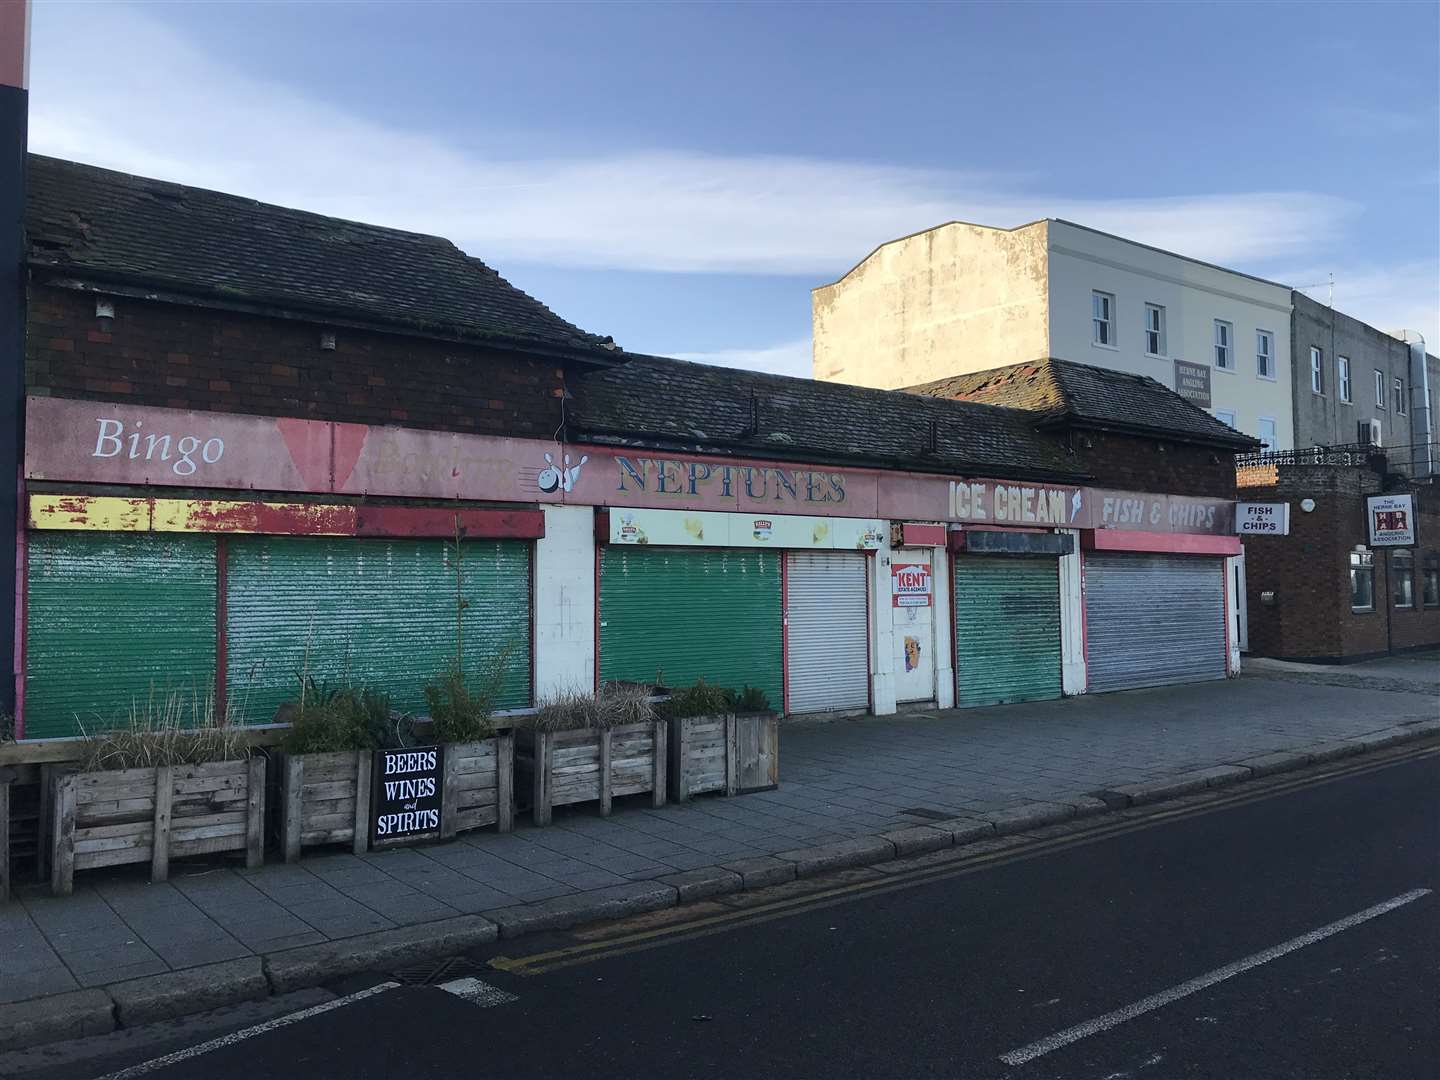 Neptunes amusements in Central Parade was bought by development firm Mile Property Group last month